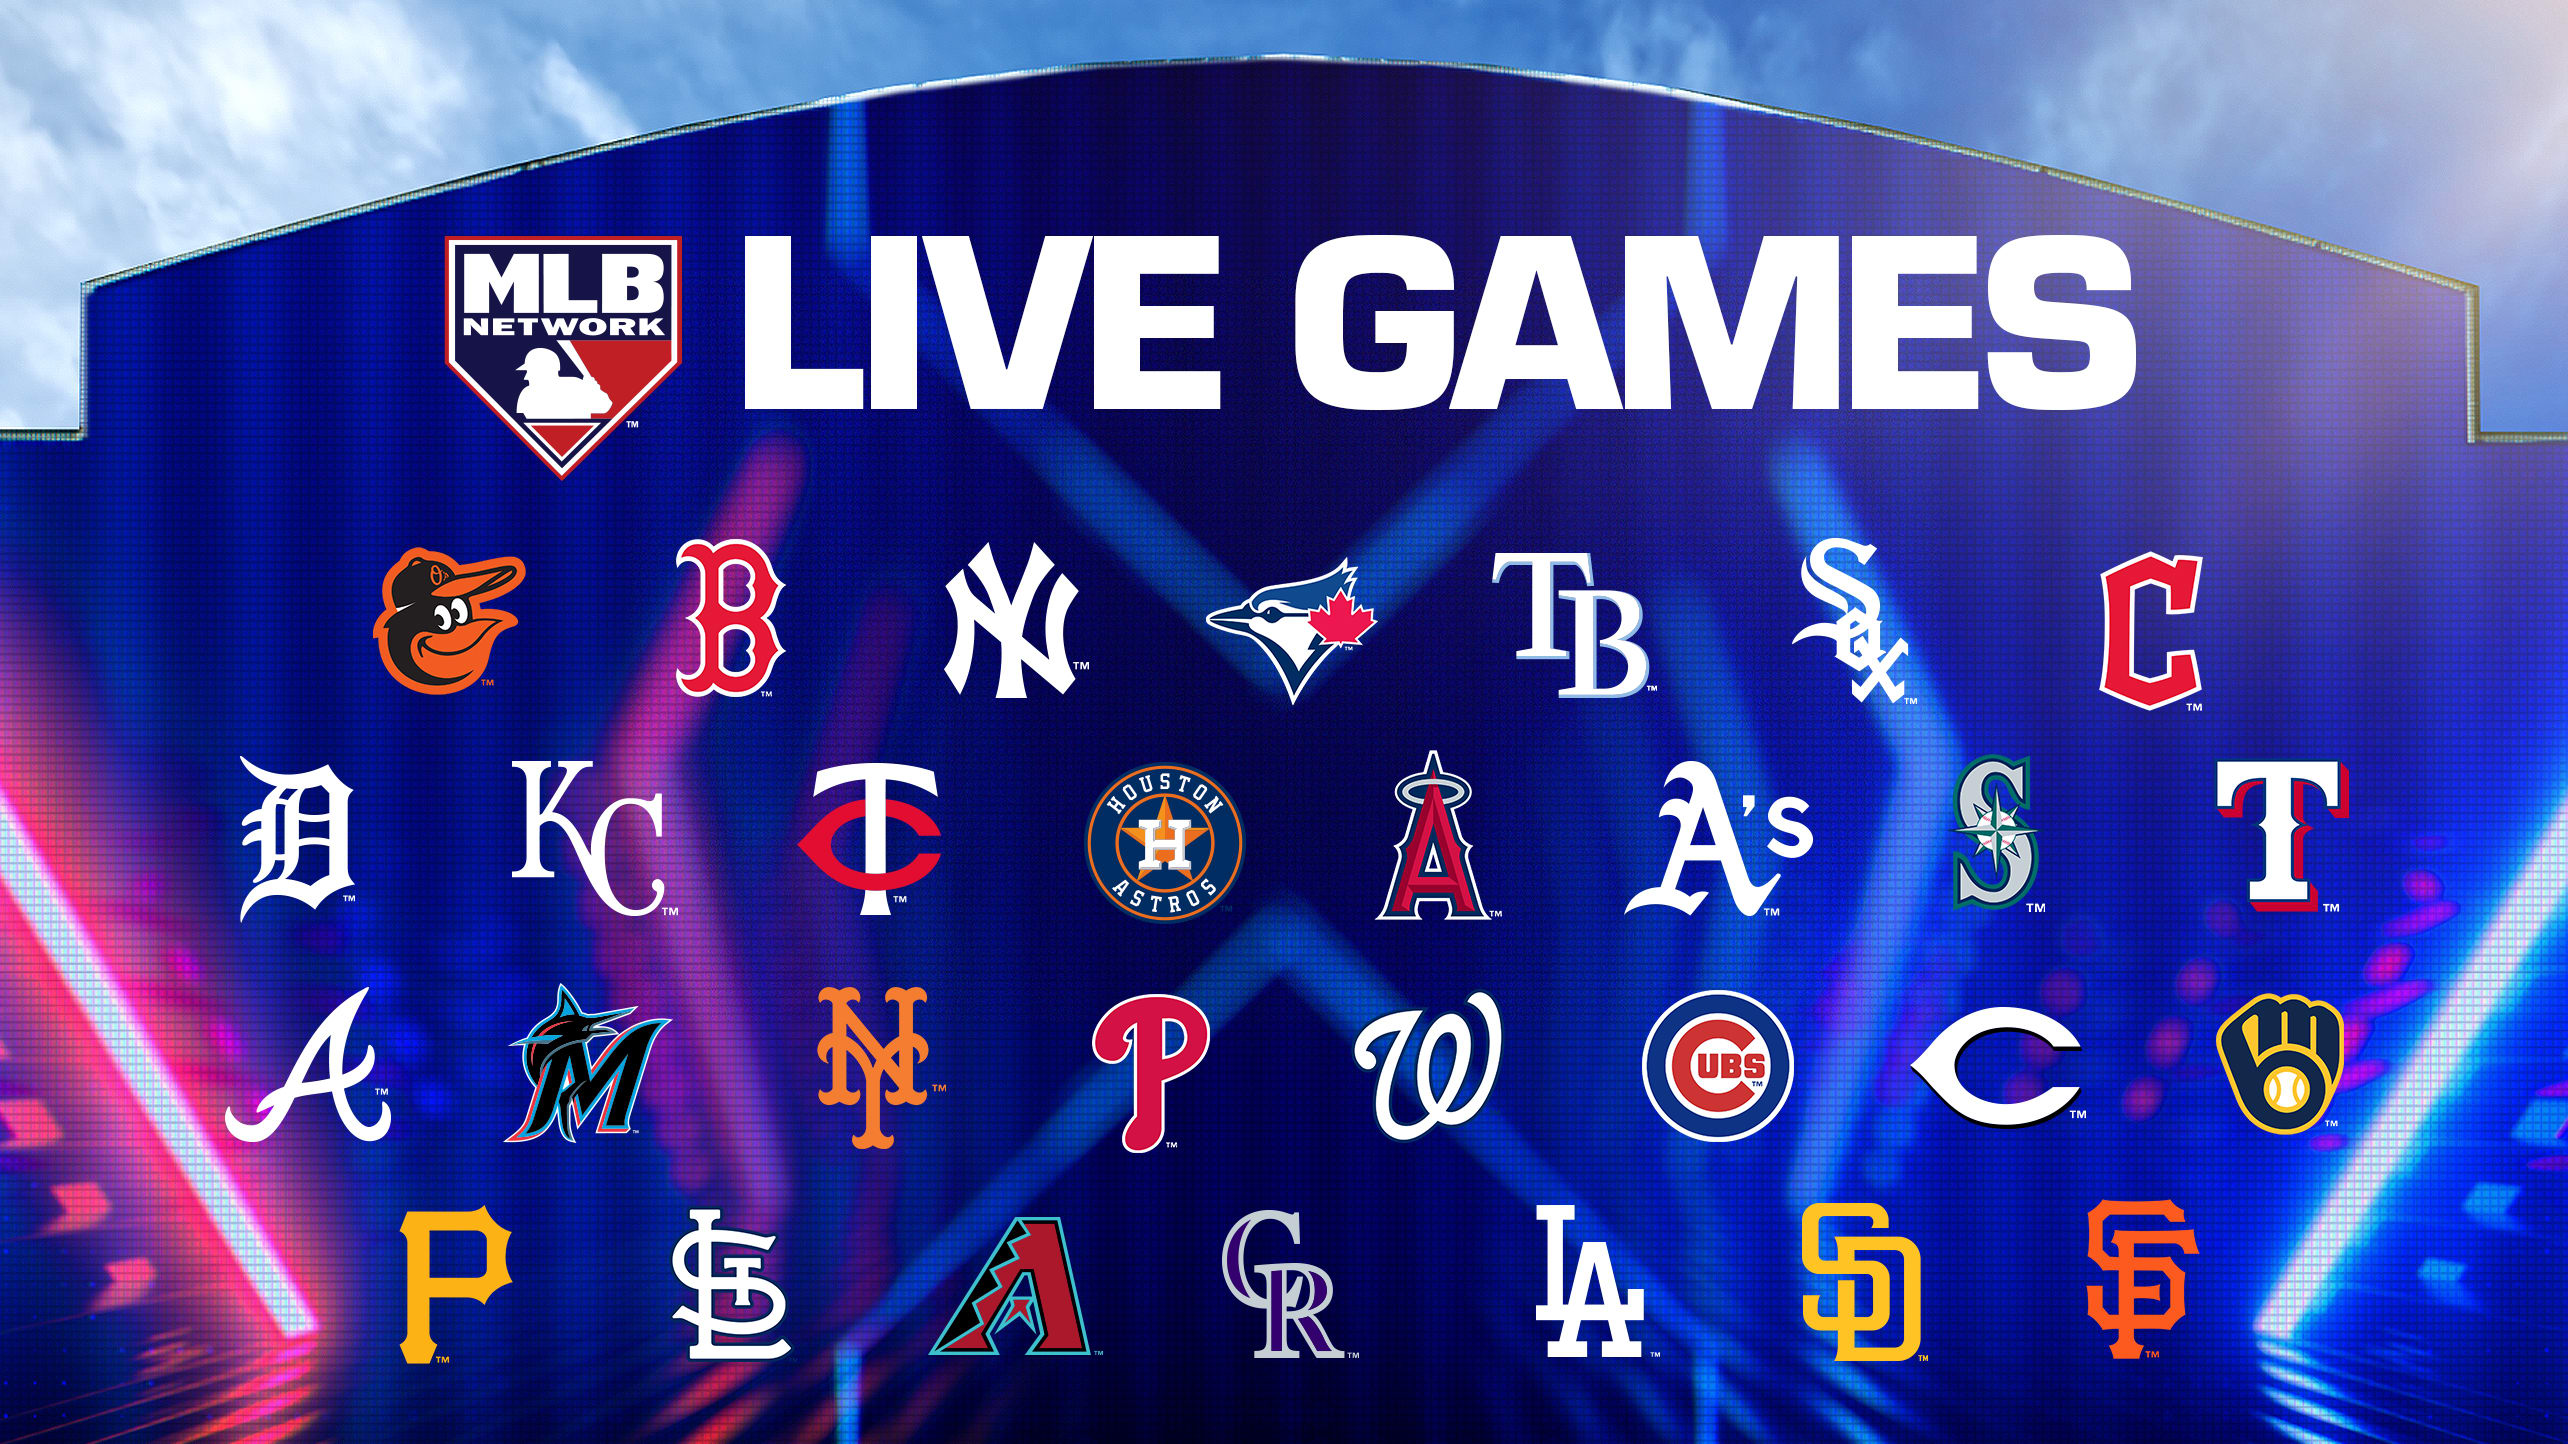 All 30 team logos and the MLB Network logo with the words Live Games